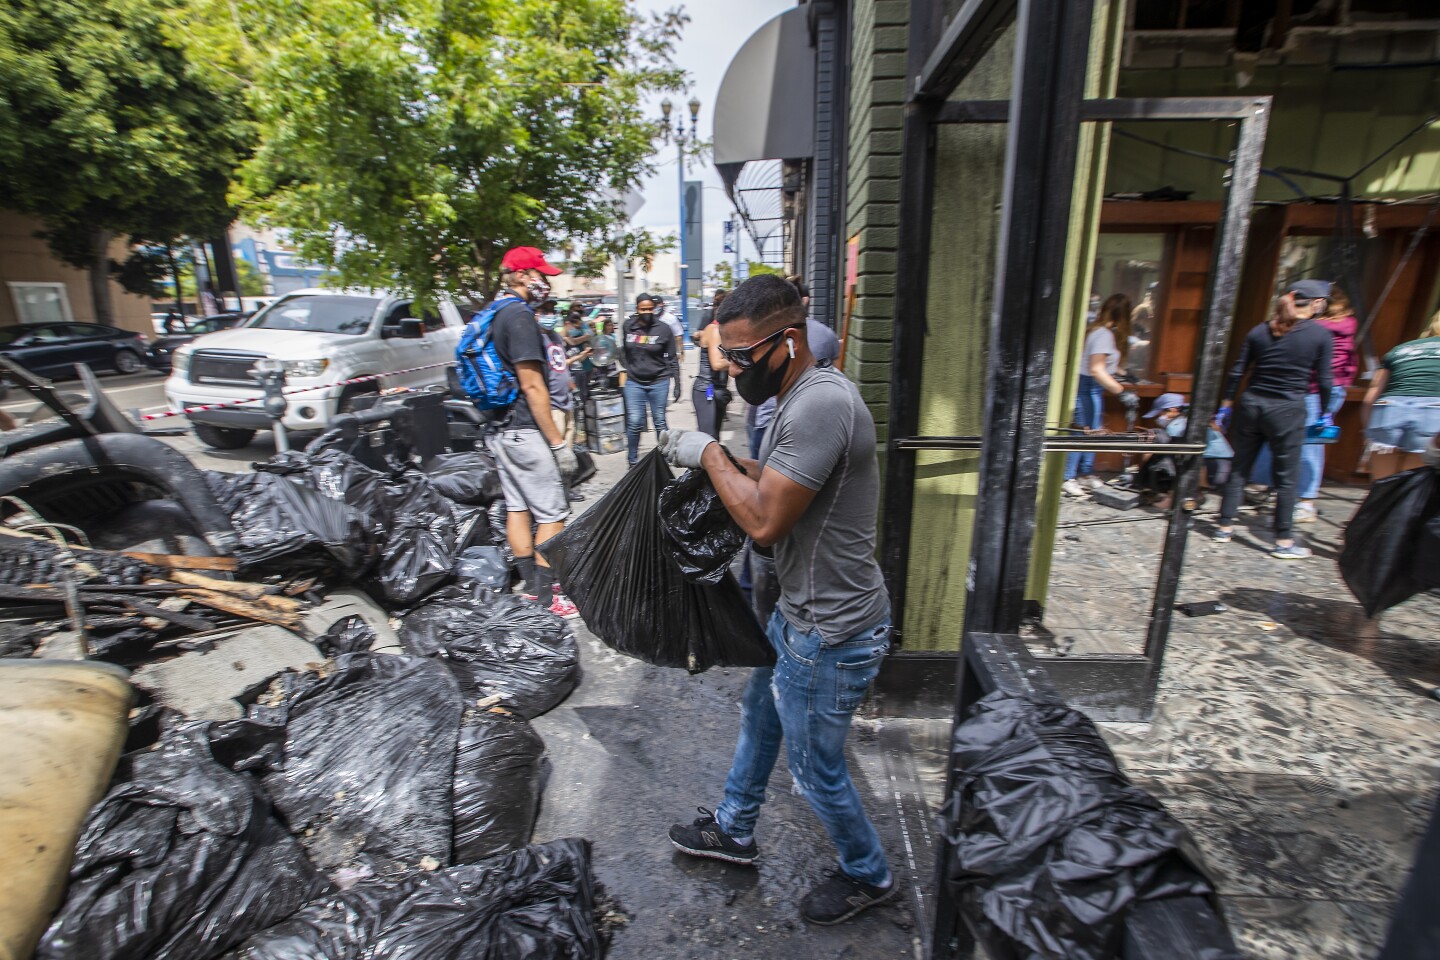 LONG BEACH, CA - JUNE 01: After looters set fire and destroyed the building Sunday evening, a large group of volunteers help clean up Legacy Beauty & Barber Salon, near the intersection of Pine Ave. and 7th Street Monday, June 1, 2020 in Long Beach, CA. (Allen J. Schaben / Los Angeles Times)